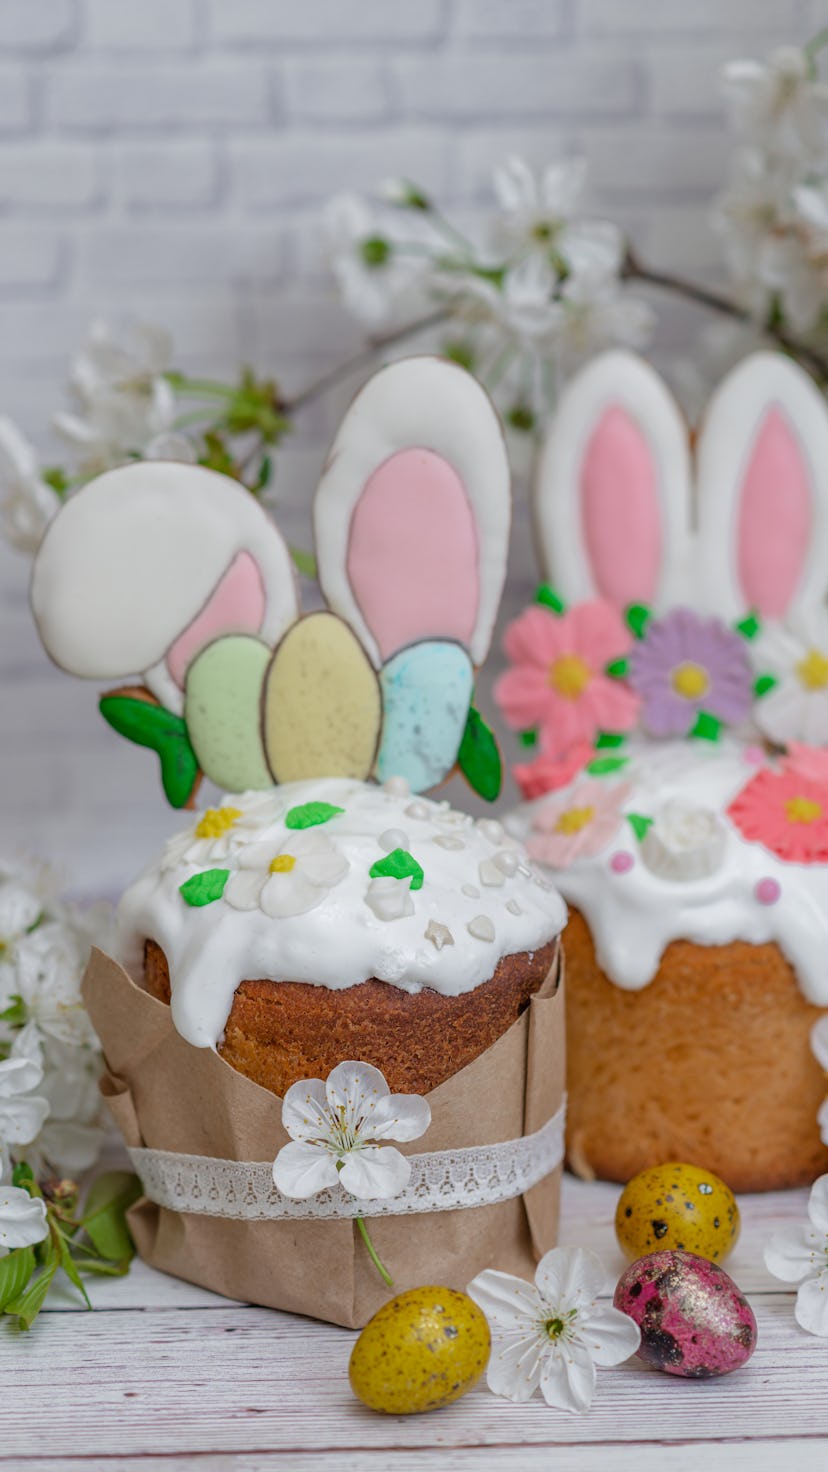 Easter cake with Easter Bunny ears and pastel eggs on top for an Easter Bunny themed dessert.